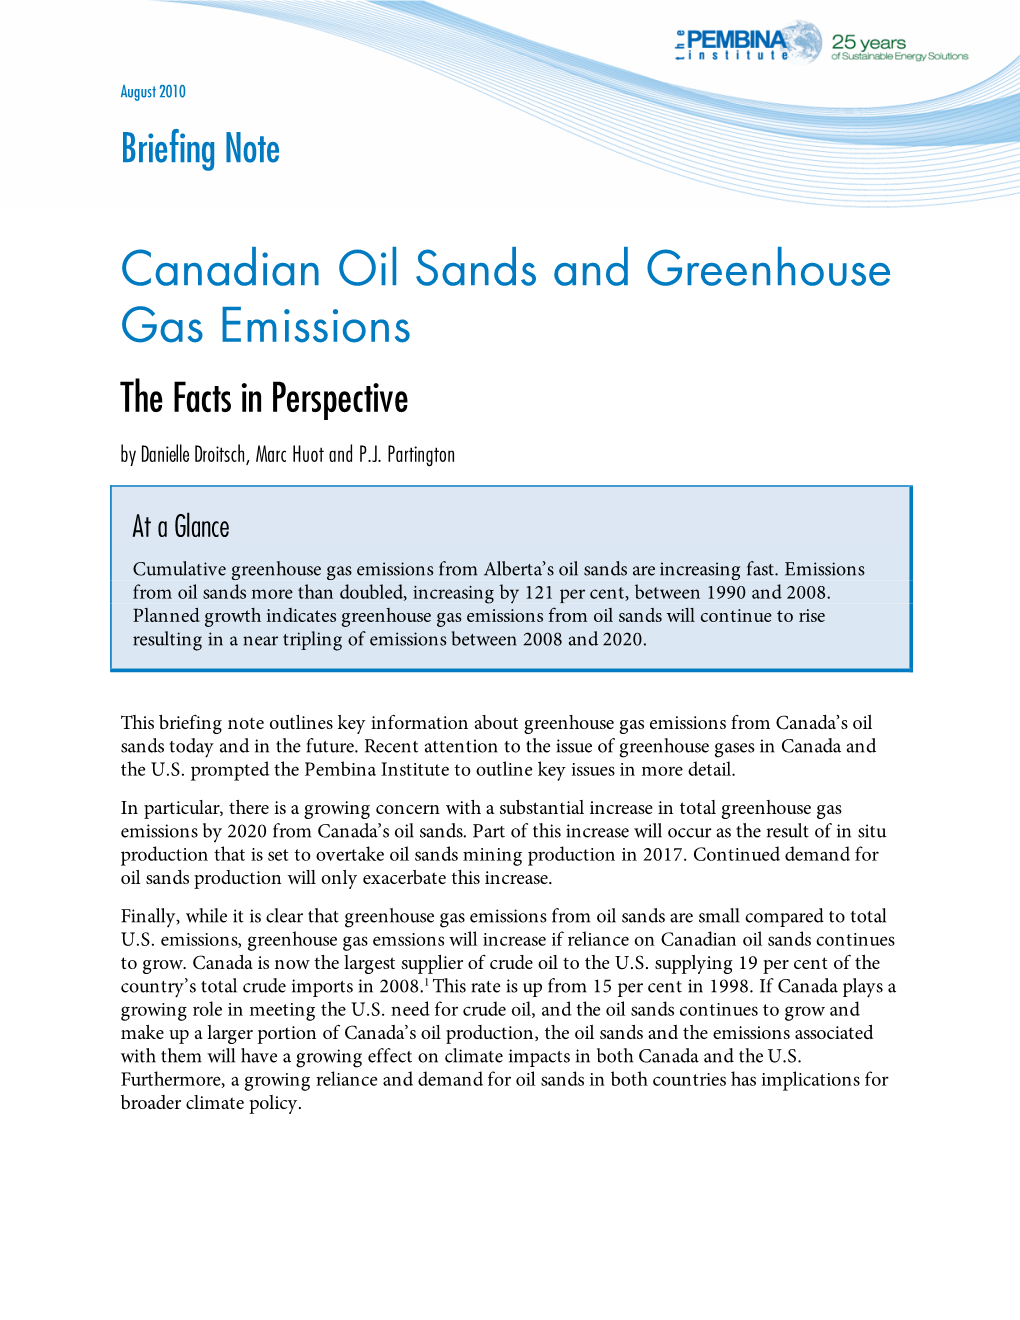 Canadian Oil Sands and Greenhouse Gas Emissions the Facts in Perspective by Danielle Droitsch, Marc Huot and P.J